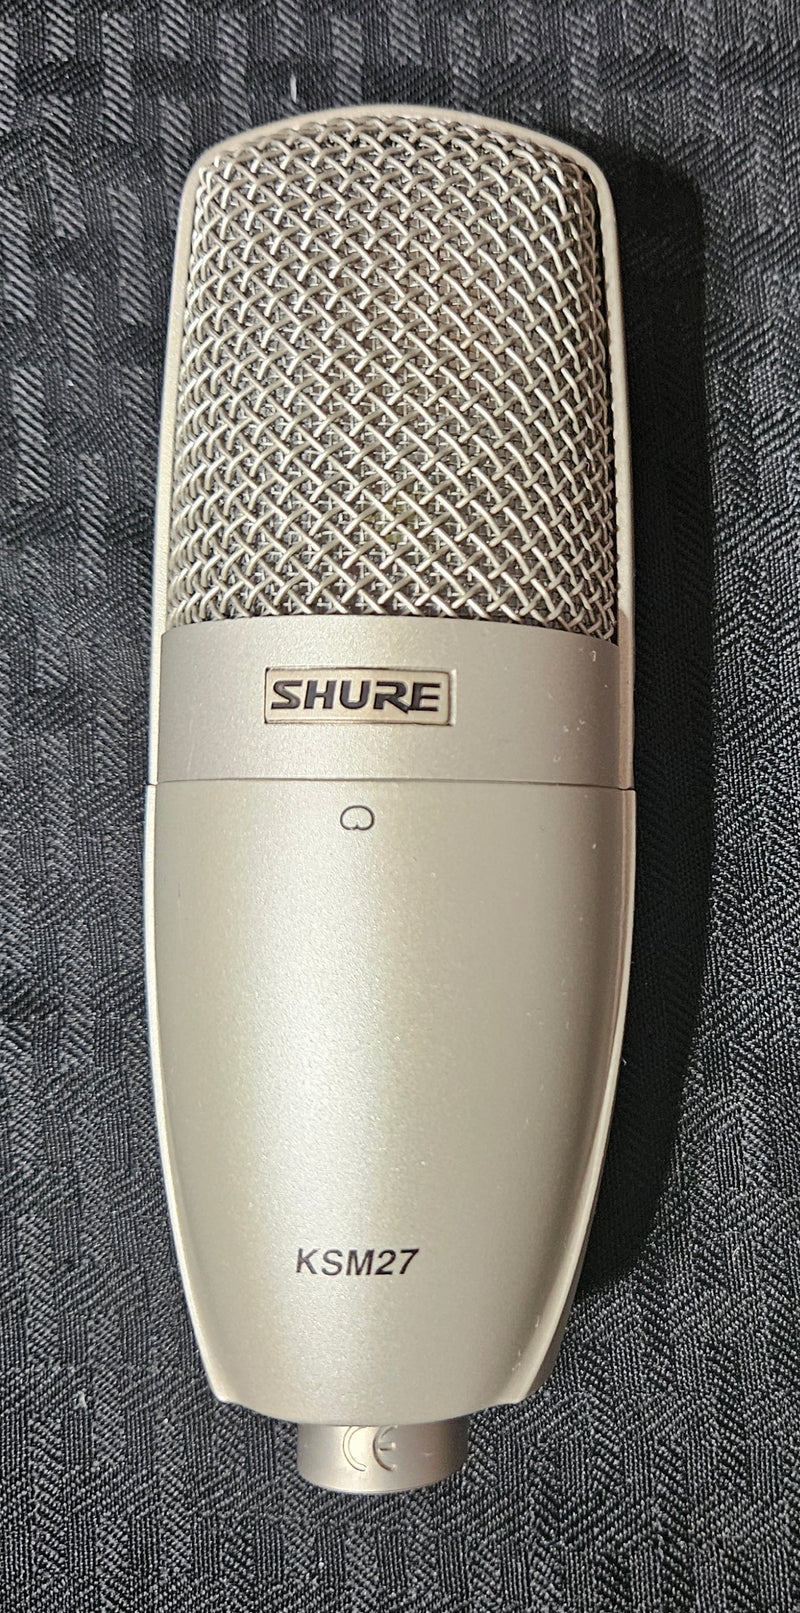 Shure KSM27 Large Condenser Microphone - Previously Owned (AW-CONSIGNMENT)